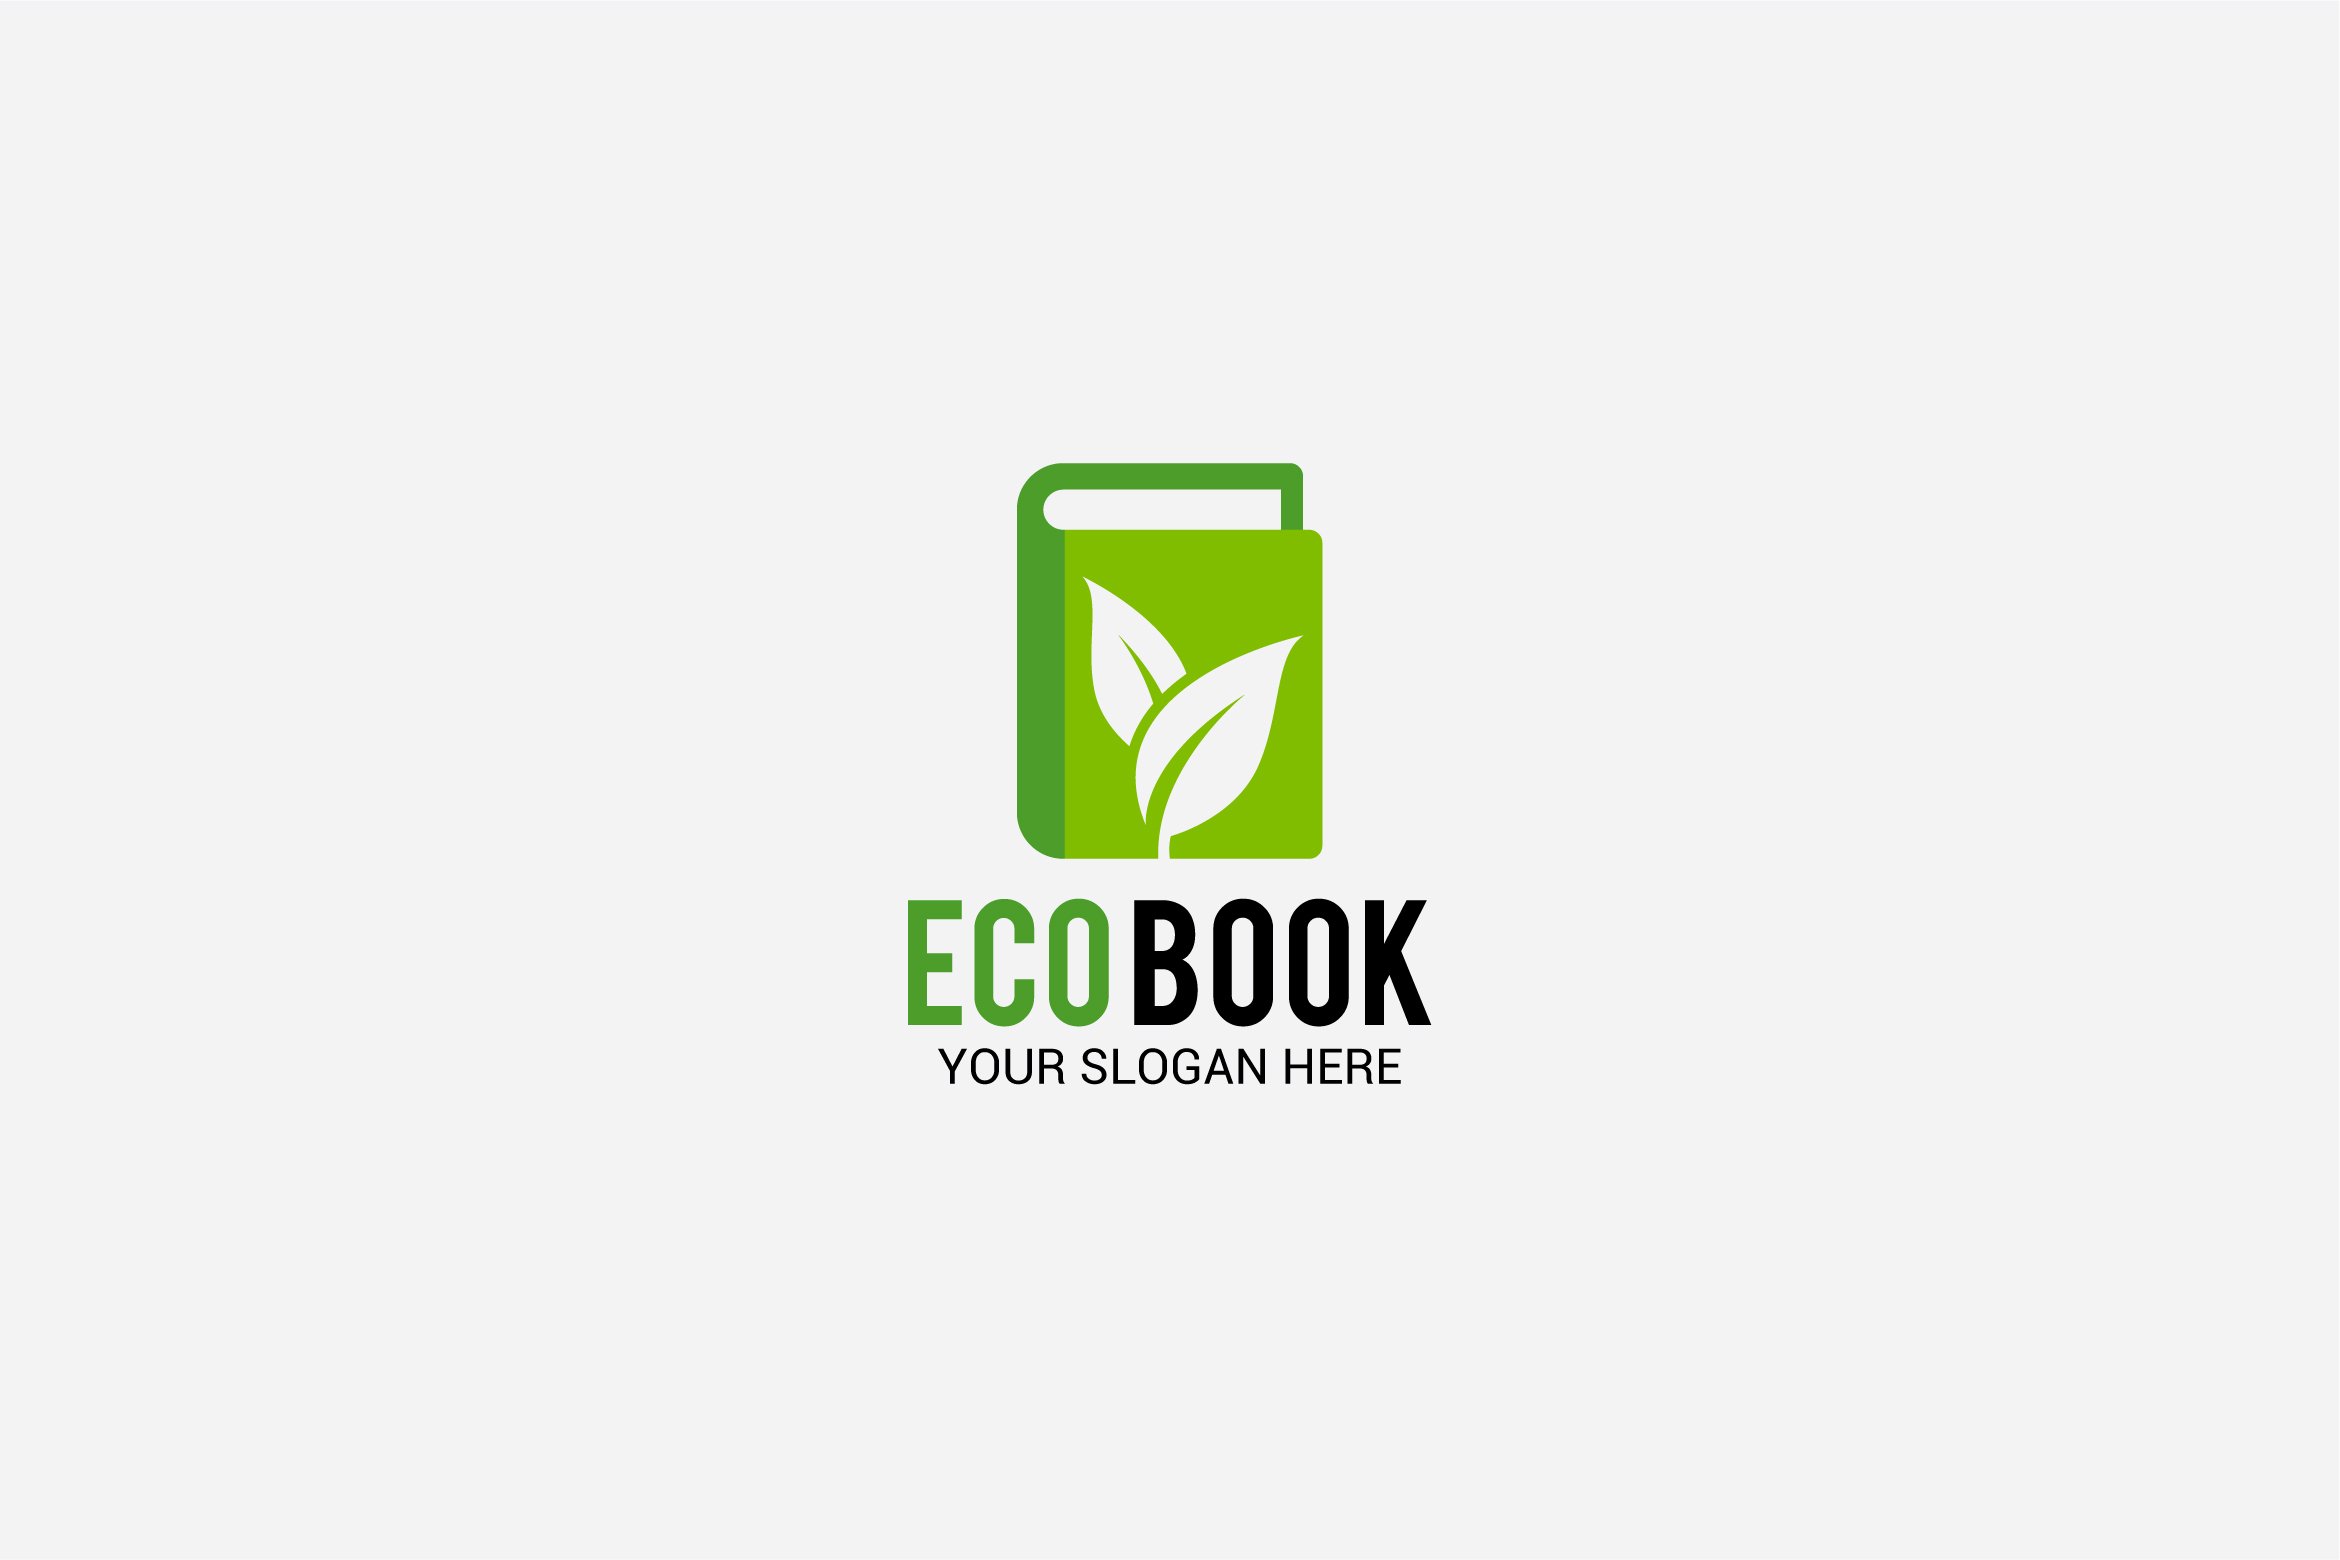 White background with a cool green book logo.